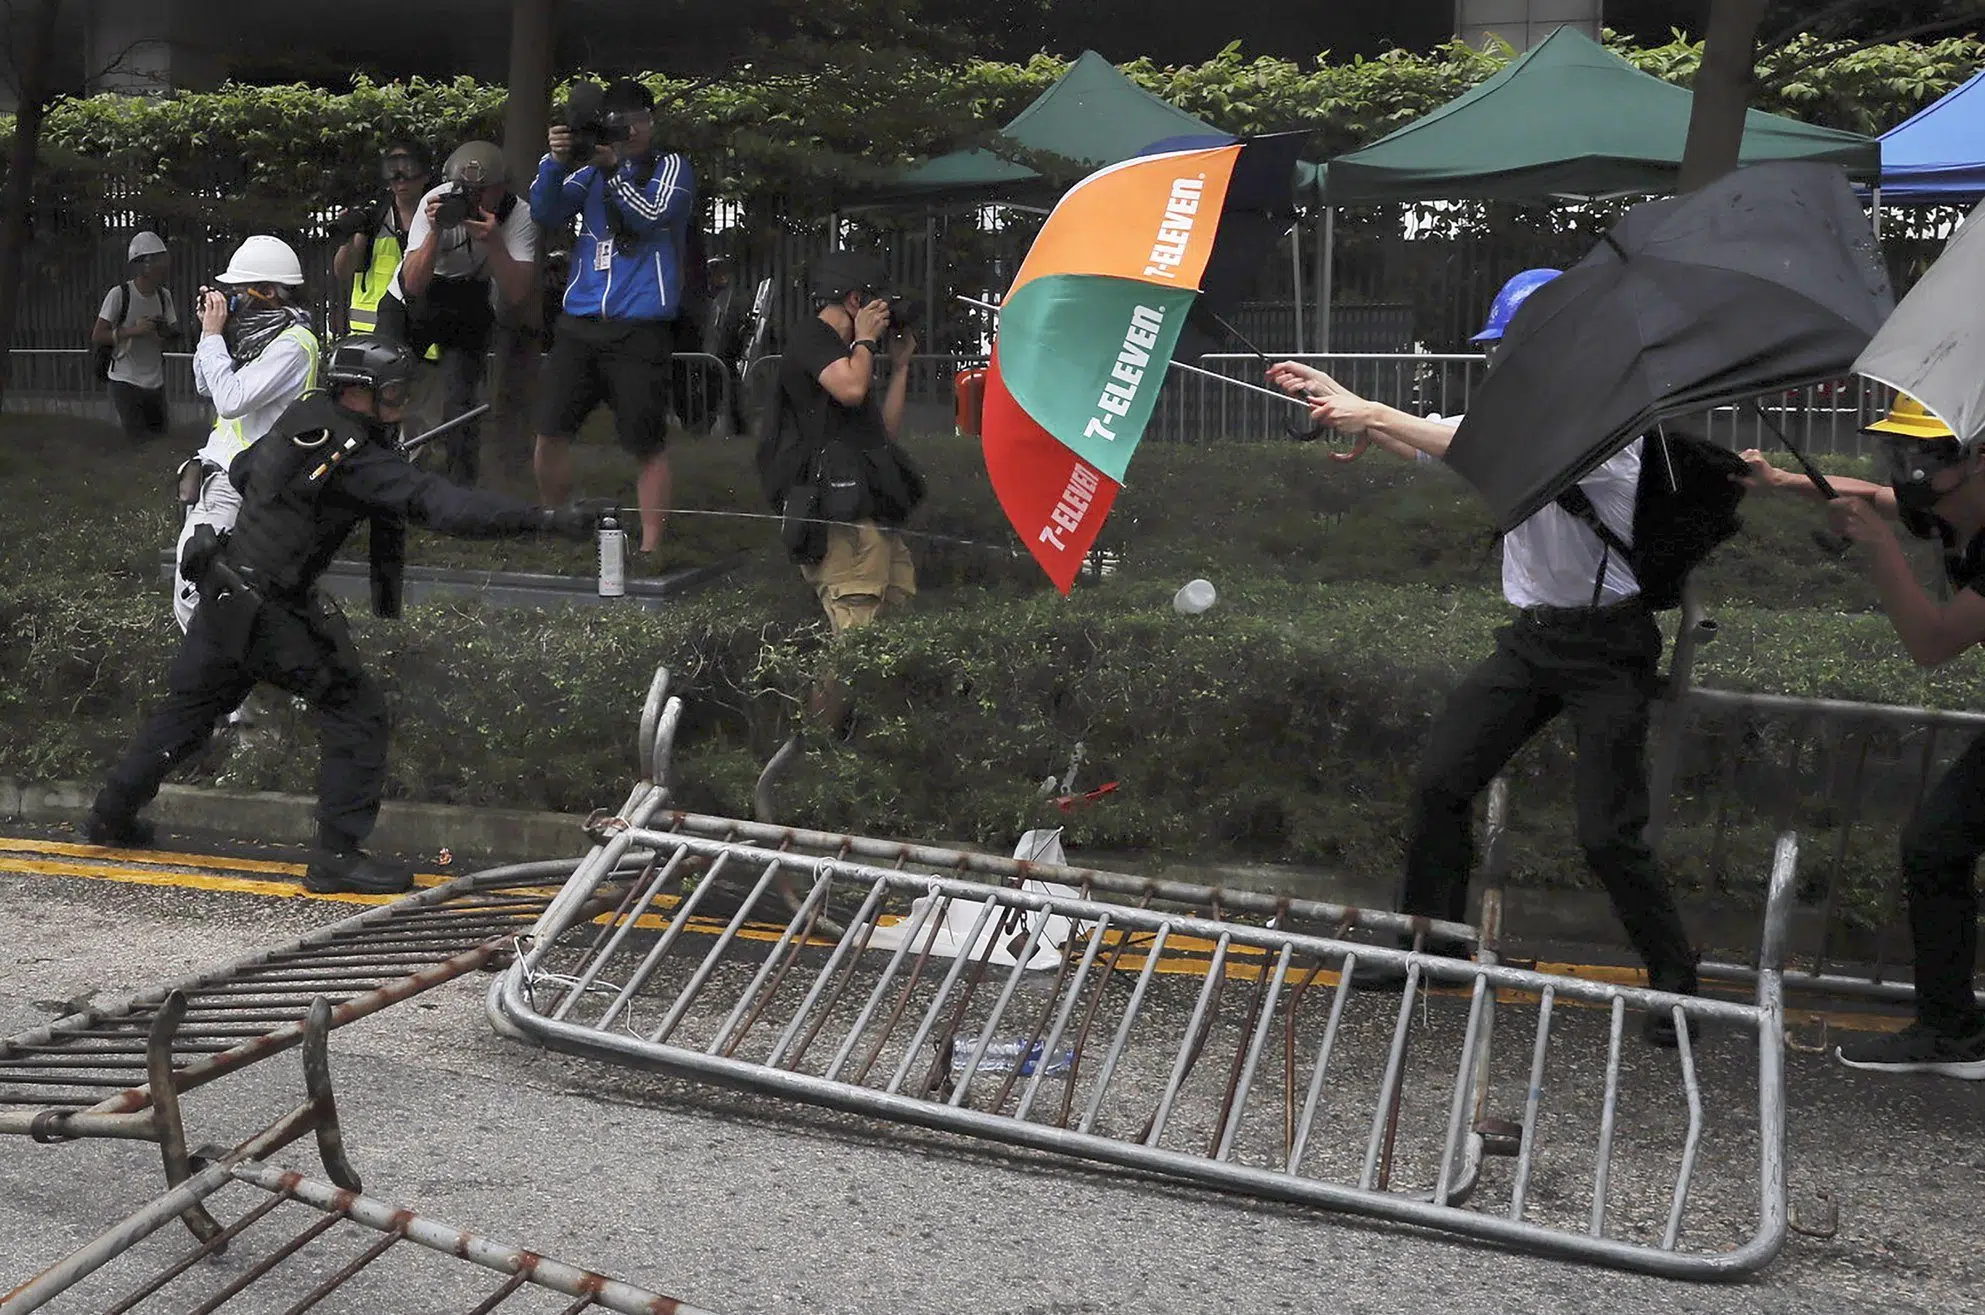 No quick ending to Hong Kong conflict, says U of S professor